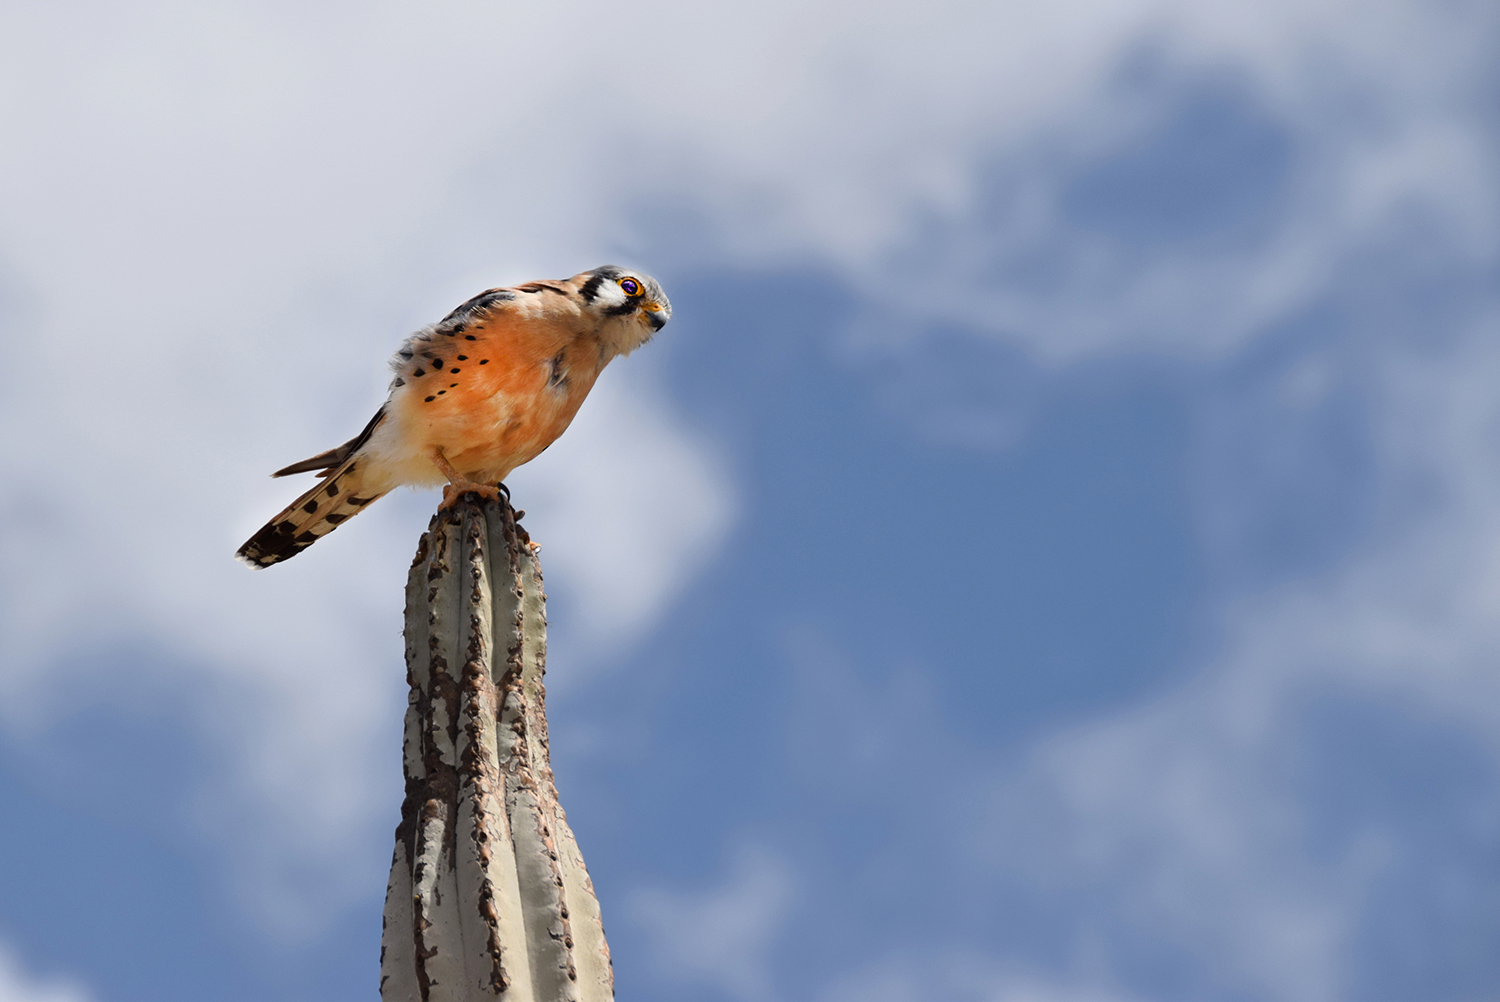 American Kestrel perched on to of a cactus cloudy sky in the background